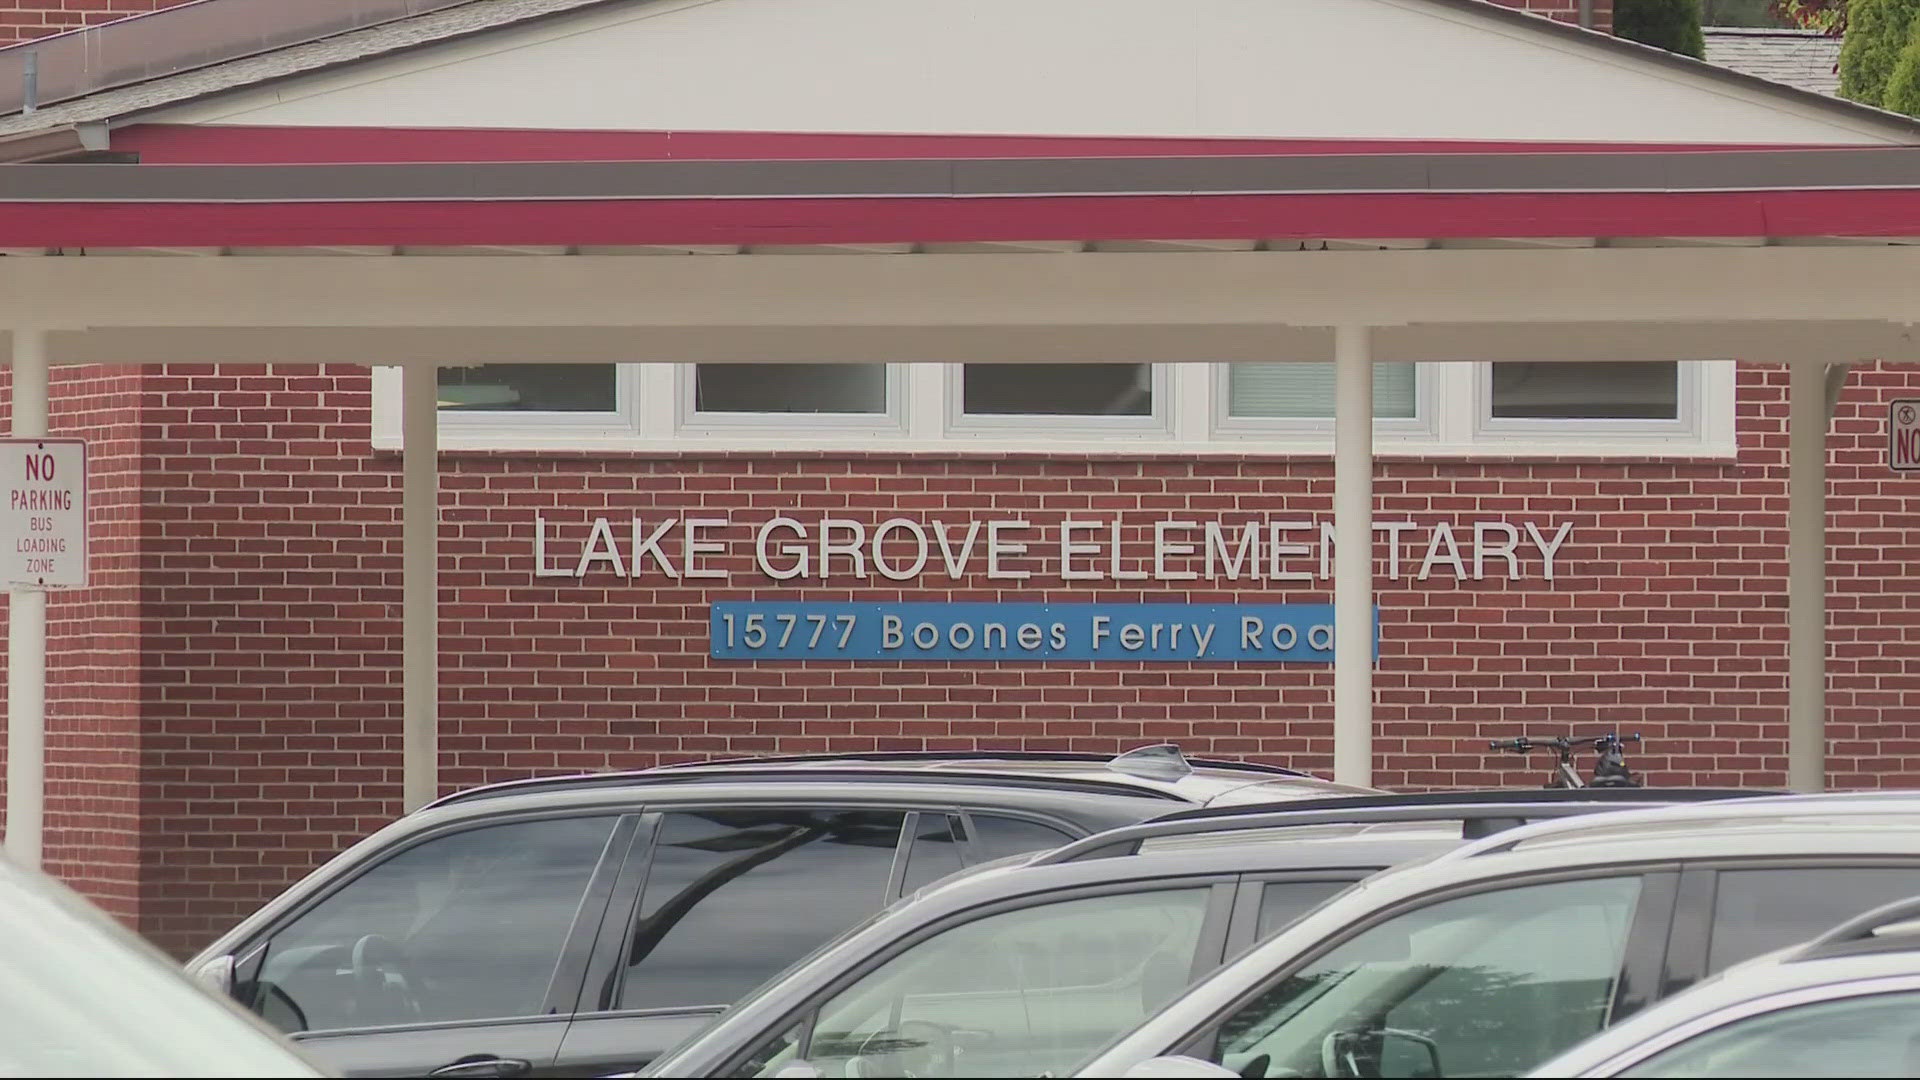 Lake Grove Elementary might be torn down to rebuild the property for a community center or retail store.